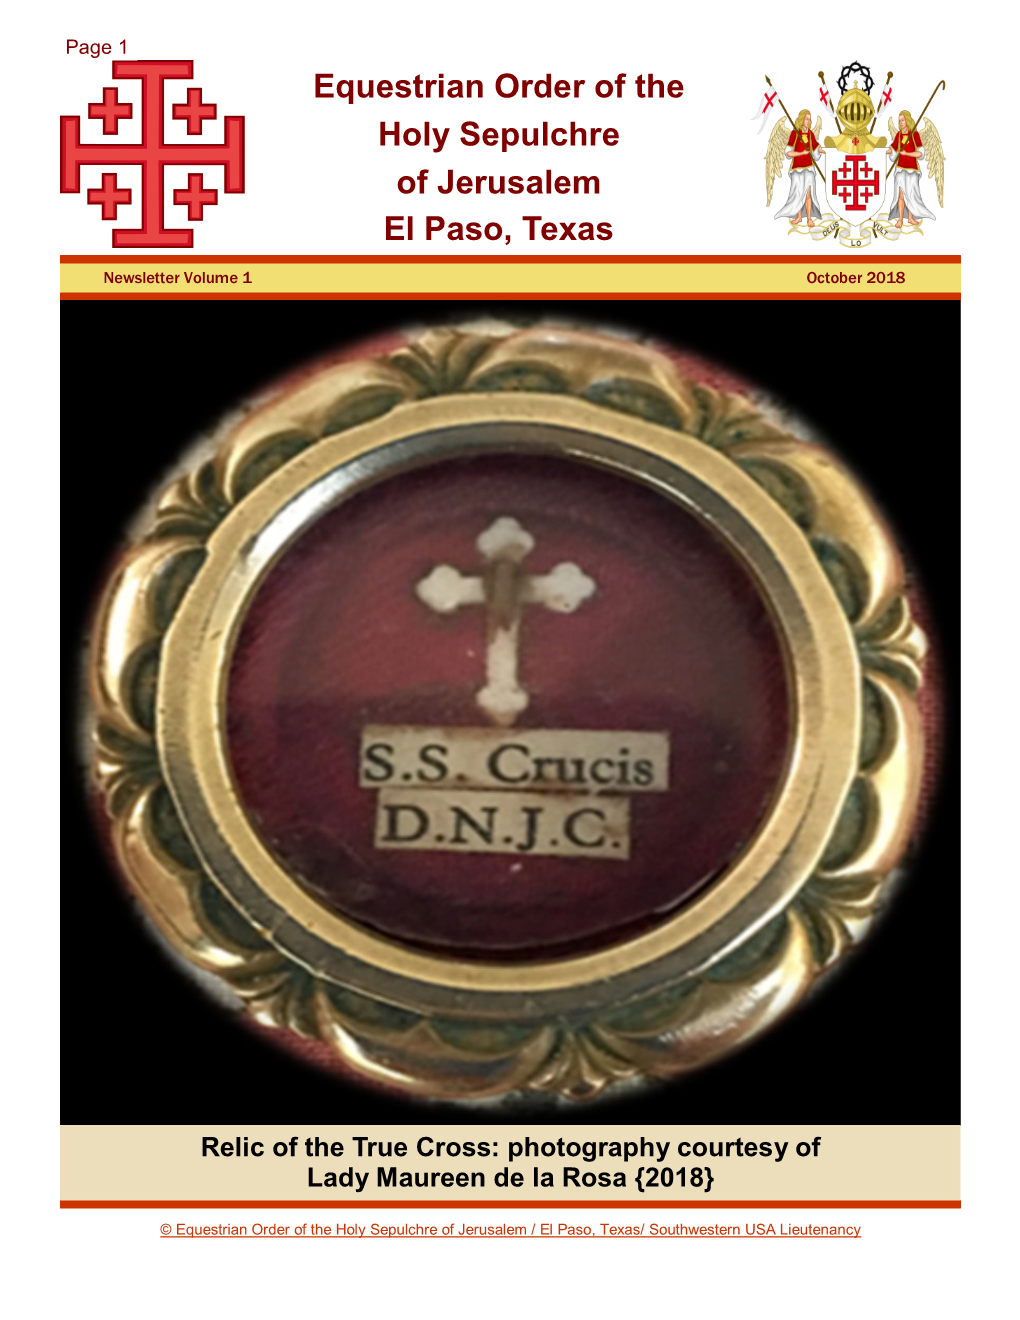 Equestrian Order of the Holy Sepulchre of Jerusalem El Paso, Texas